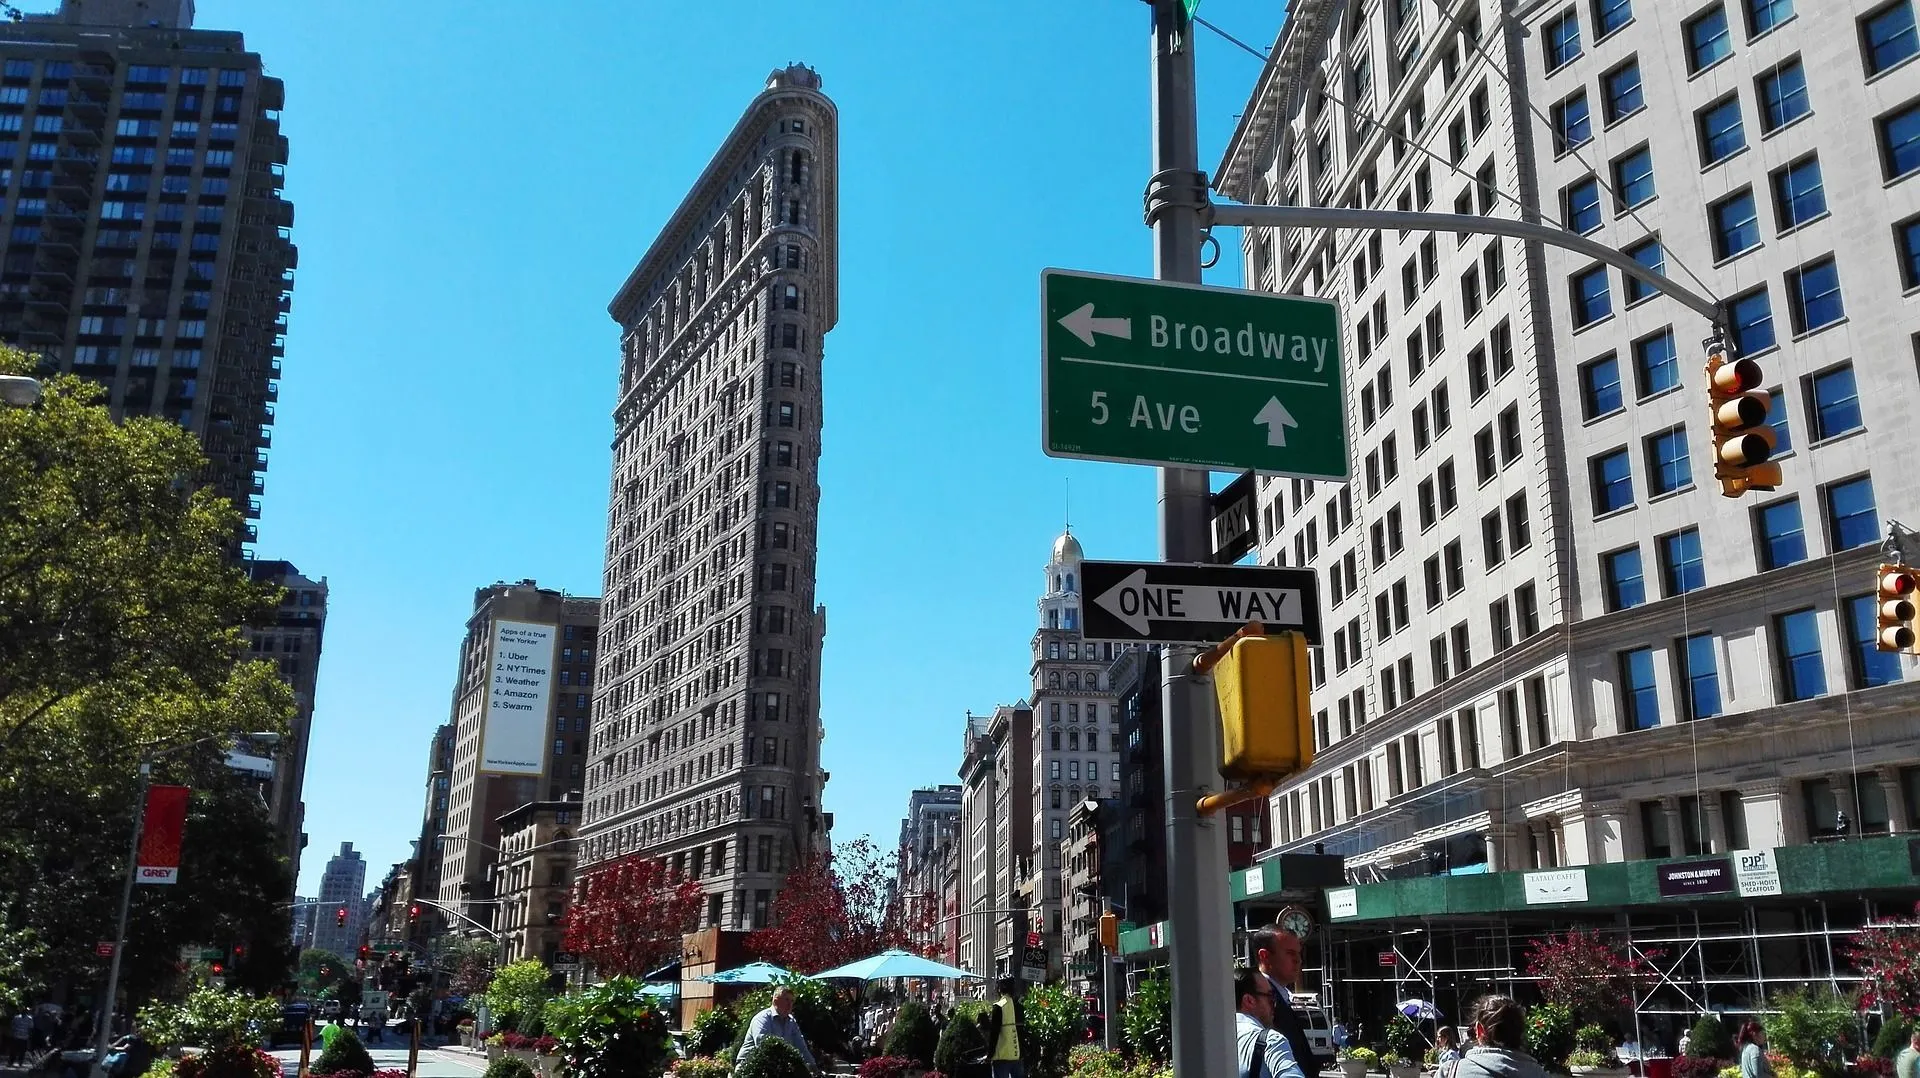 Flatiron is one the tallest building in the area. It has a unique structure. So know all about flatiron building facts.